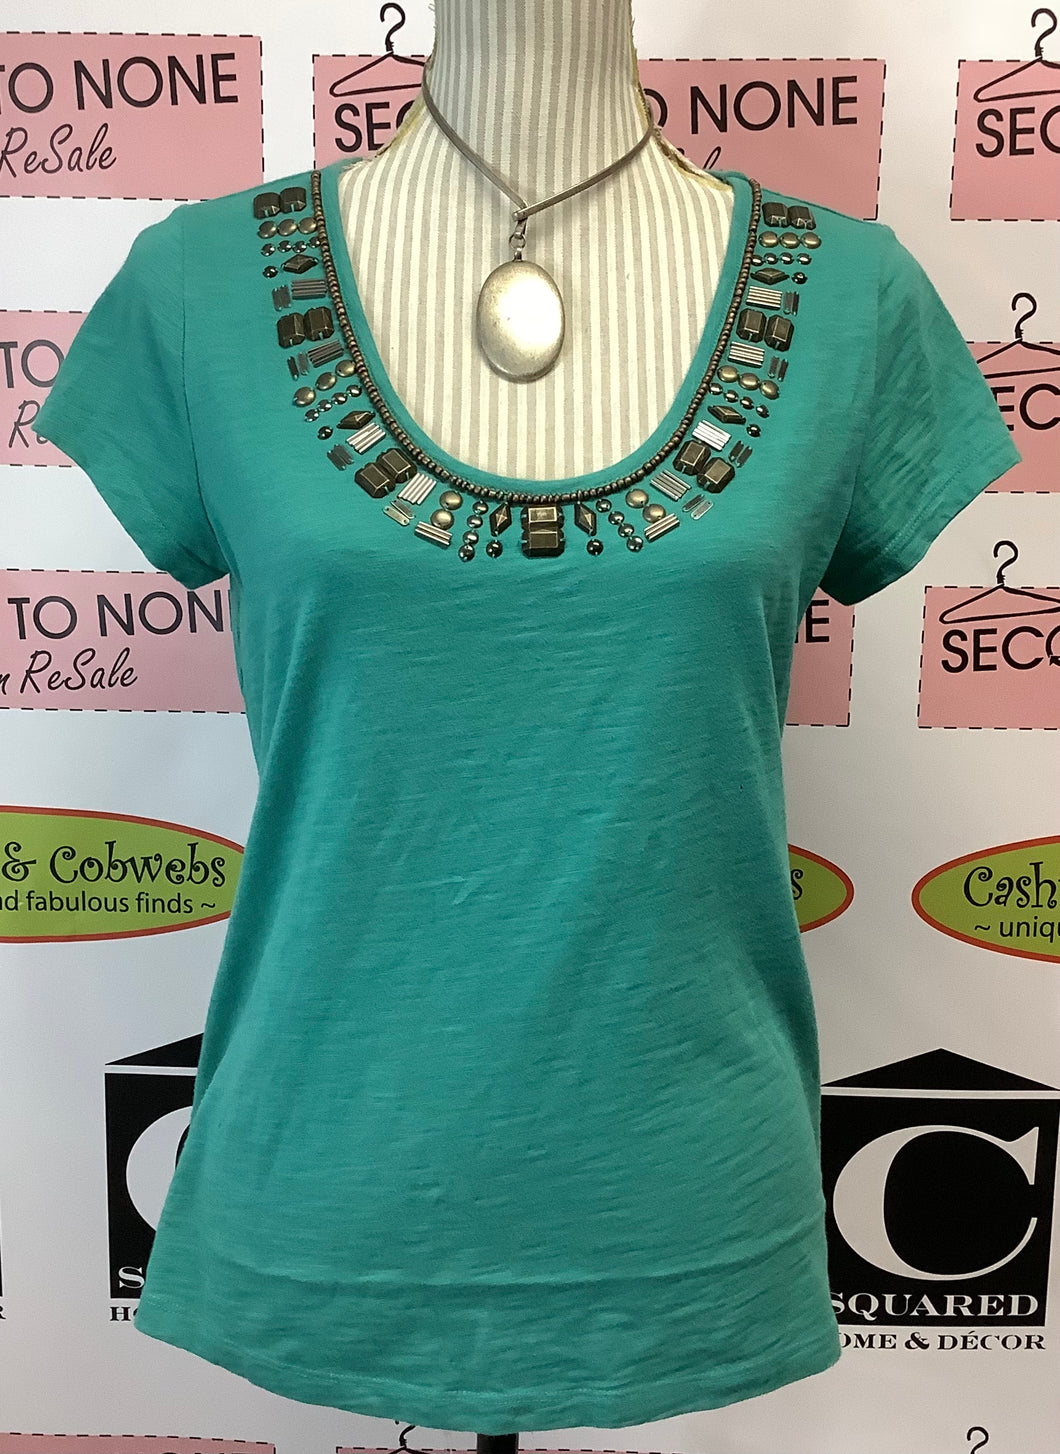 Bronze Studded Teal Top (Size S)